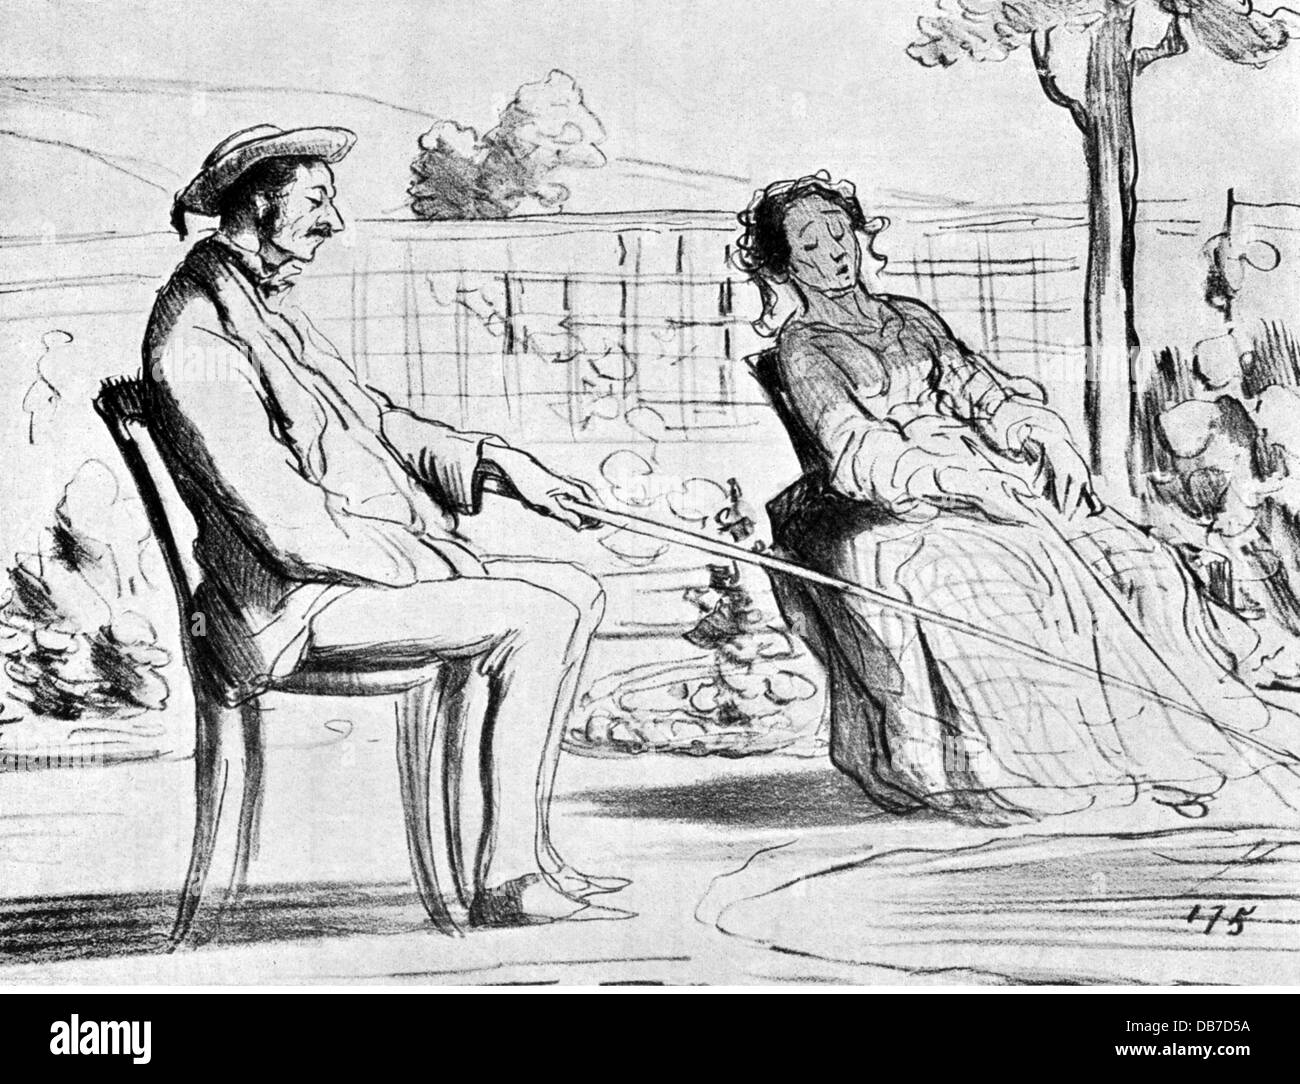 leisure, fishing, 'Les Plaisirs de la Villegiature' (Pleasures of the Summer Resort), couple fishing at the garden pond, lithograph, by Honore Daumier (1808 - 1879), from: 'Le Charivari', Paris, 13.5.1858, Additional-Rights-Clearences-Not Available Stock Photo